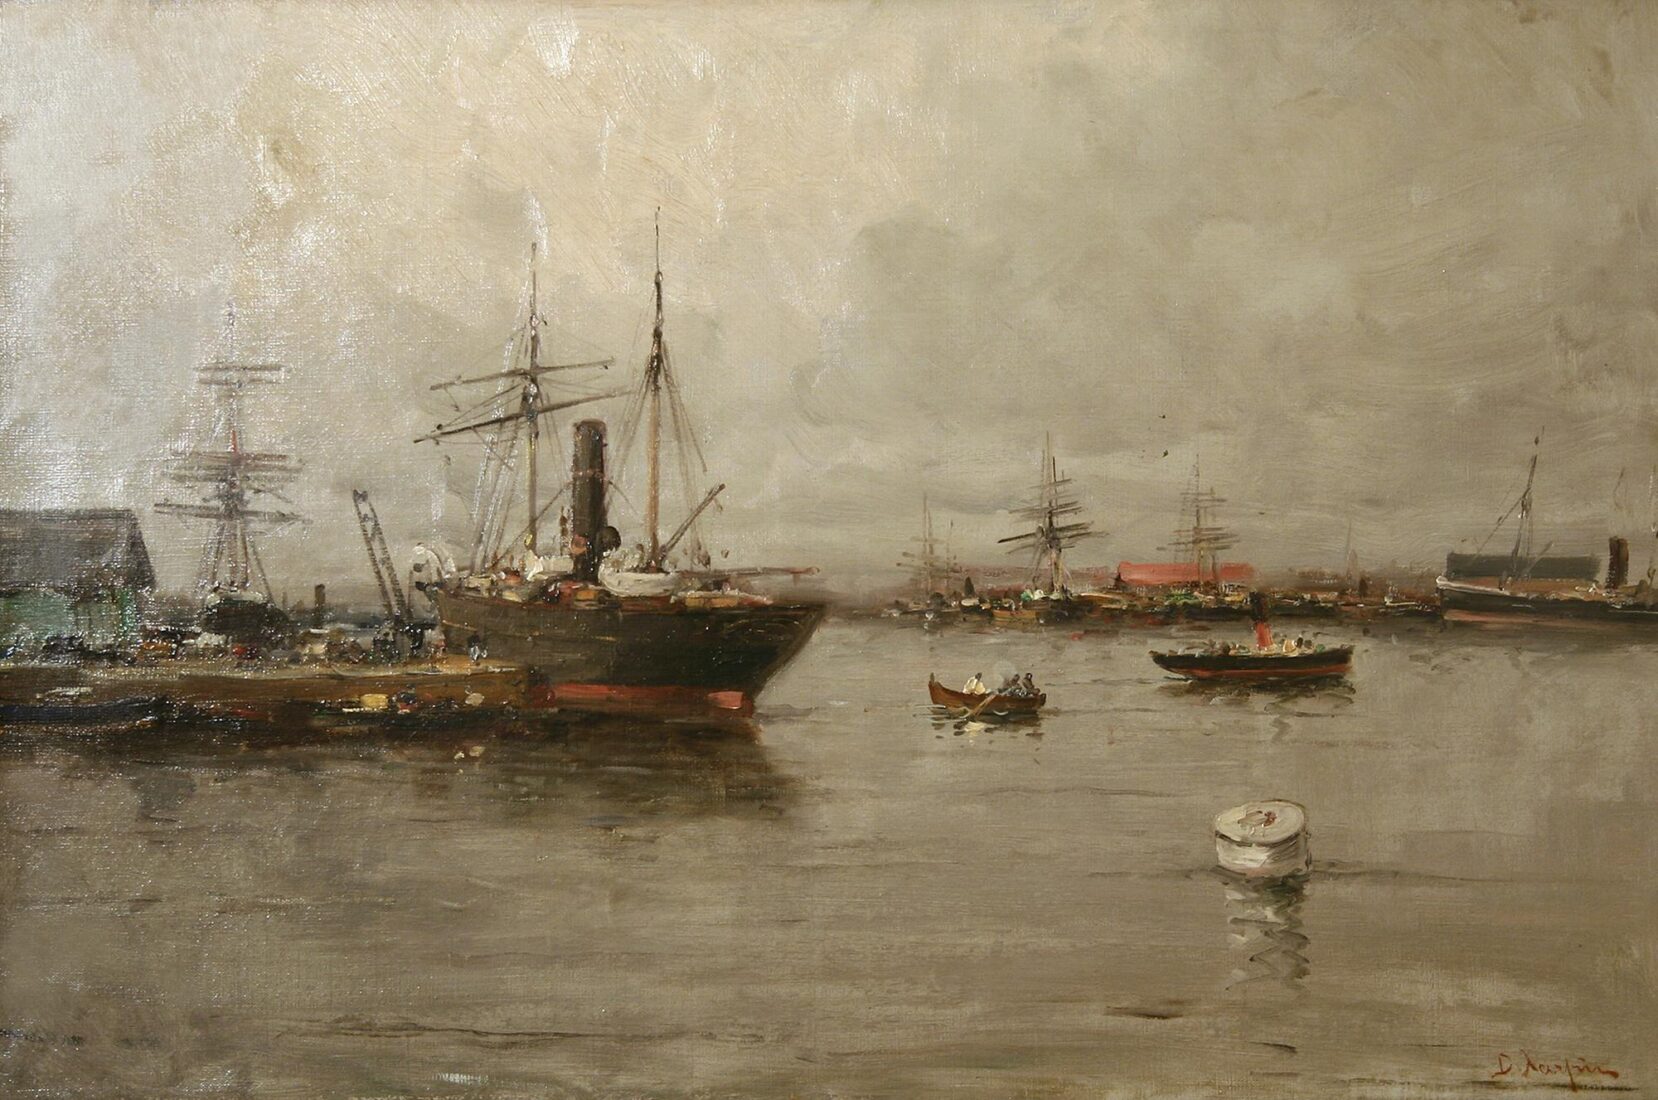 Harbour with Steamships and Sailboats - Chatzis Vasileios